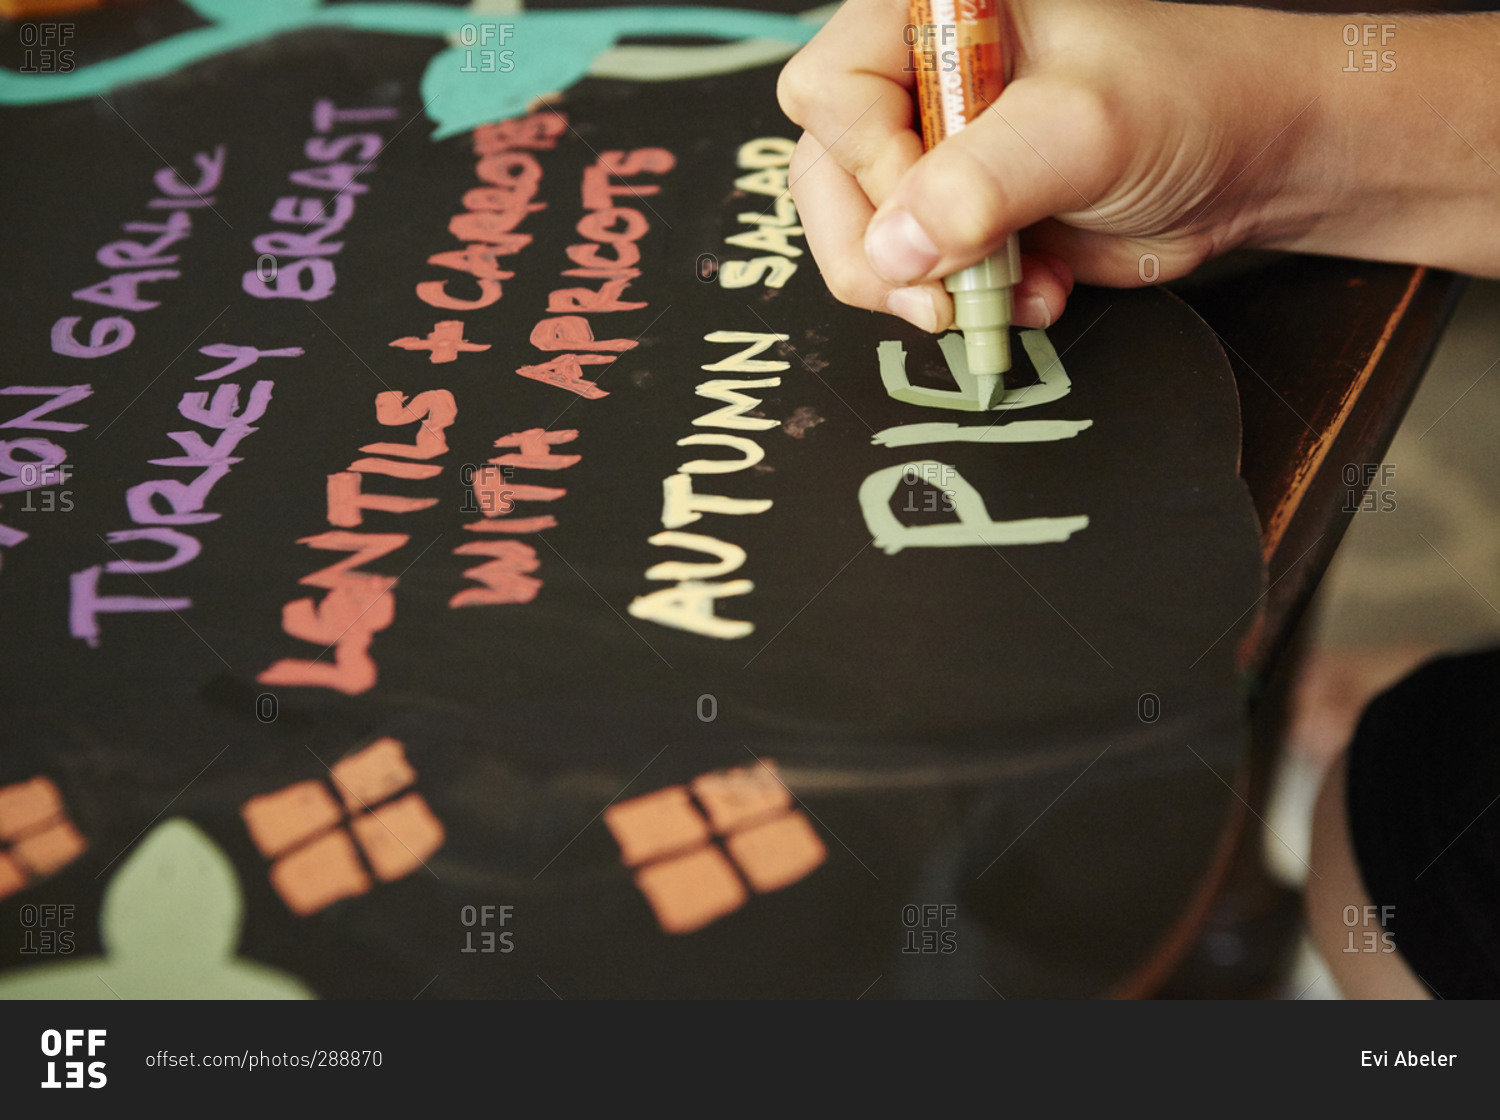 Child's hand writing a Thanksgiving menu on a chalkboard